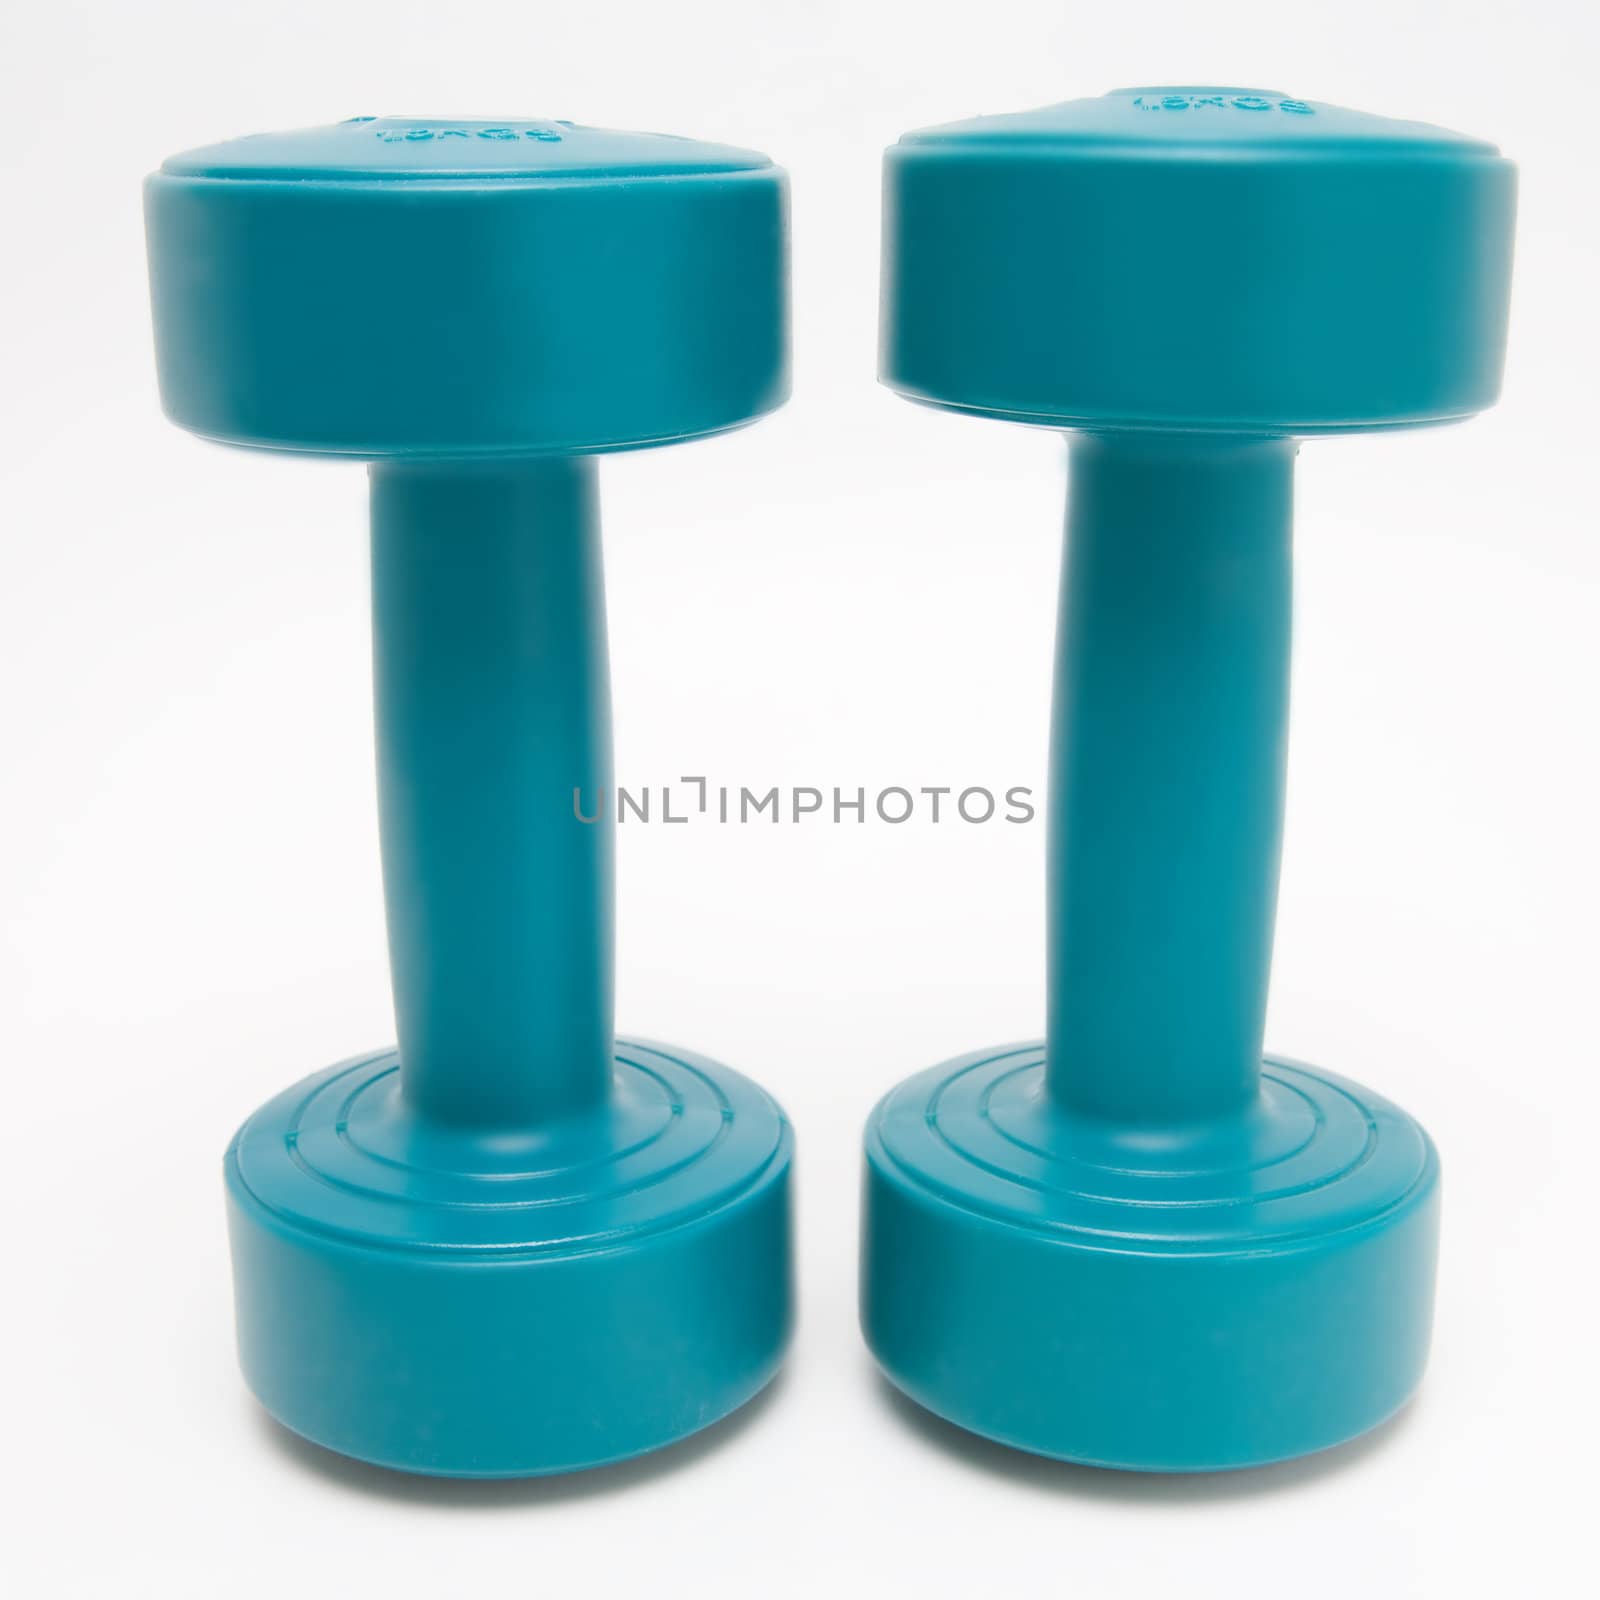 Pair of hand weights on a white background